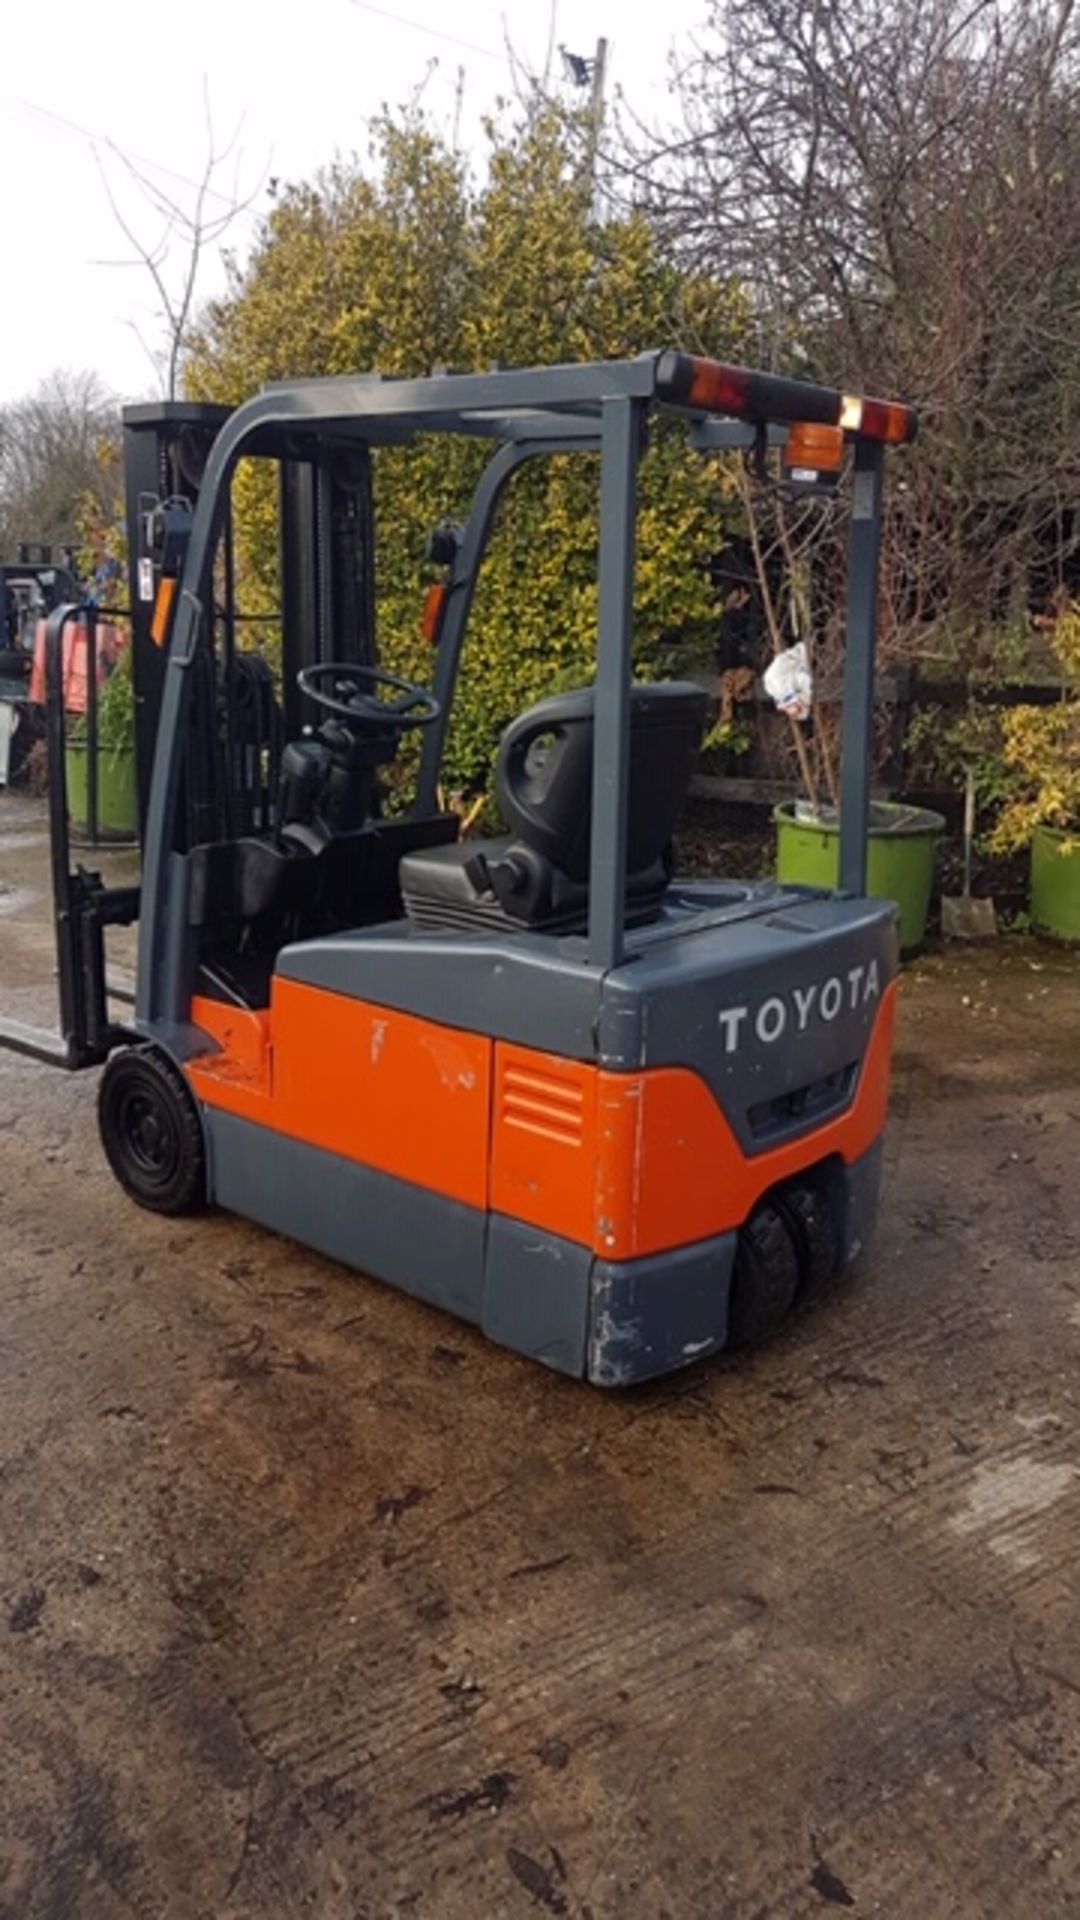 TOYOTA 7FBE15 3 WHEEL BATTERY POWERED FORKLIFT TRUCK, CONTAINER SPEC TRIPLE MAST WITH SIDE SHIFT, - Image 4 of 5